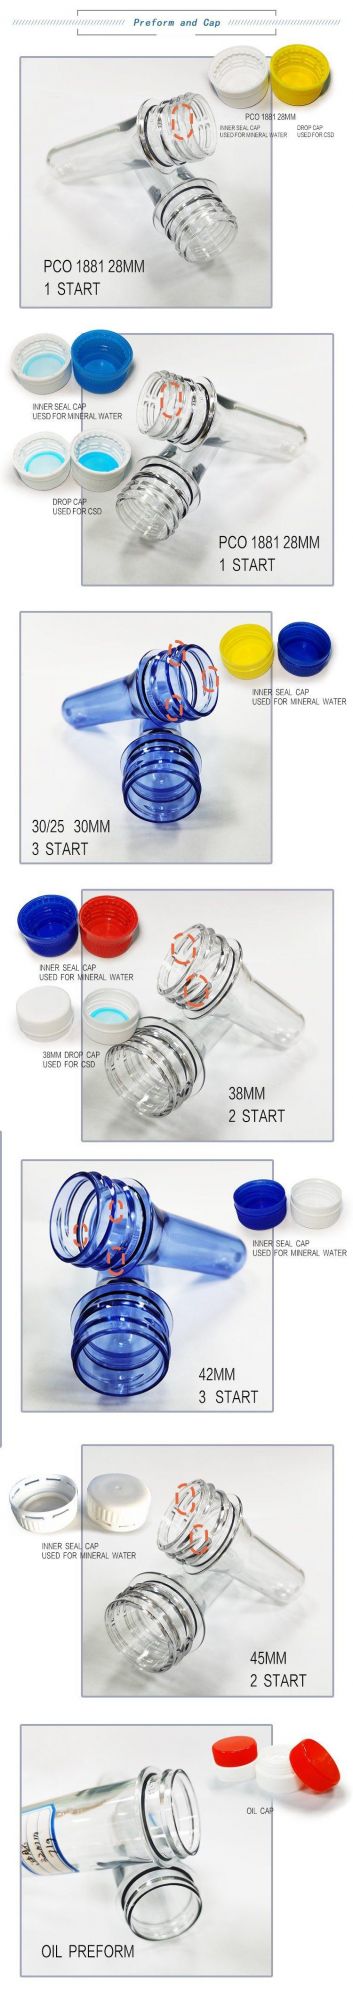 High Quality 28mm 38mm Soda Bottle Preforms and Caps 28-410